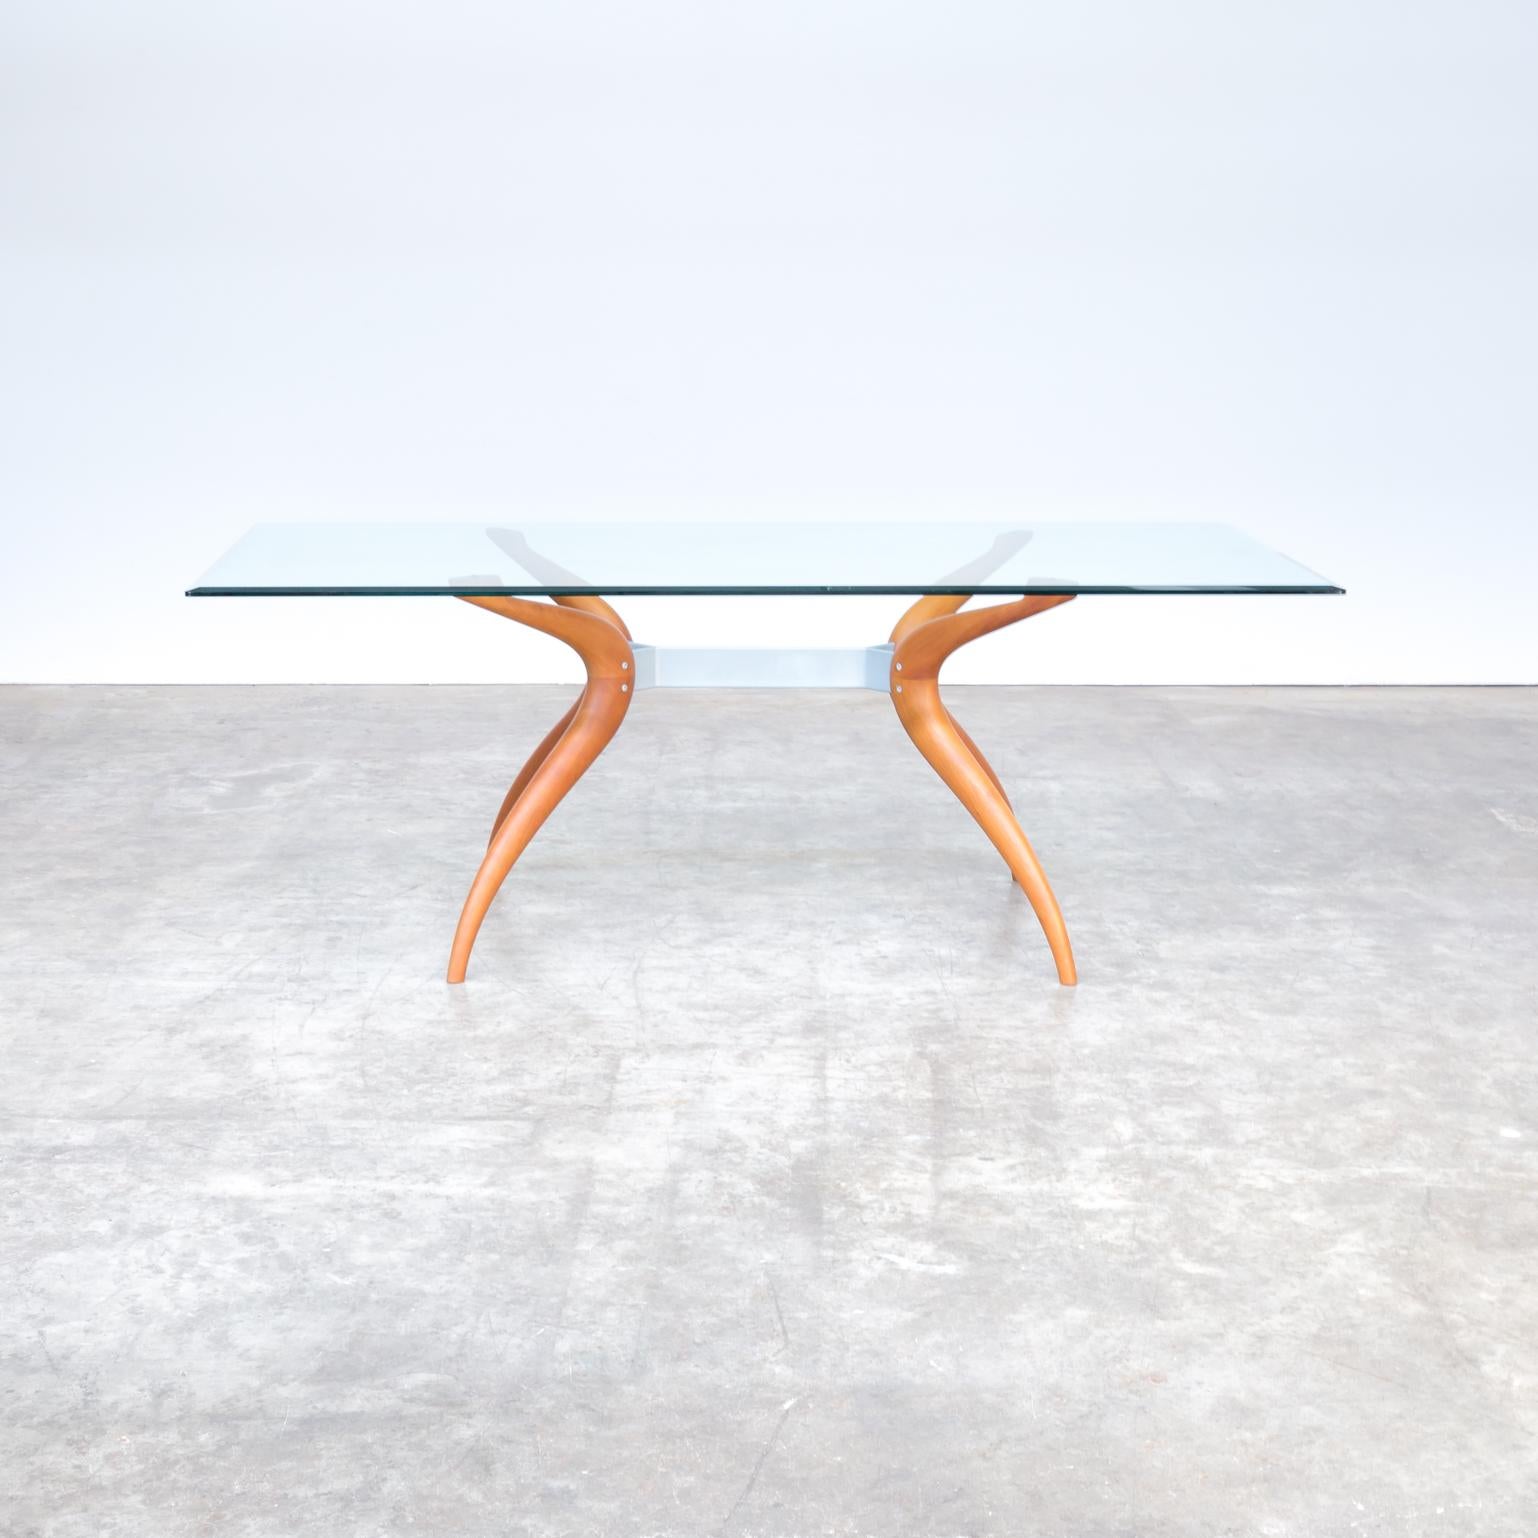 M.Marconato & T. Zappa ‘retro’ walnut and glass dining table for Porada. Very good condition, consistent with age and use.